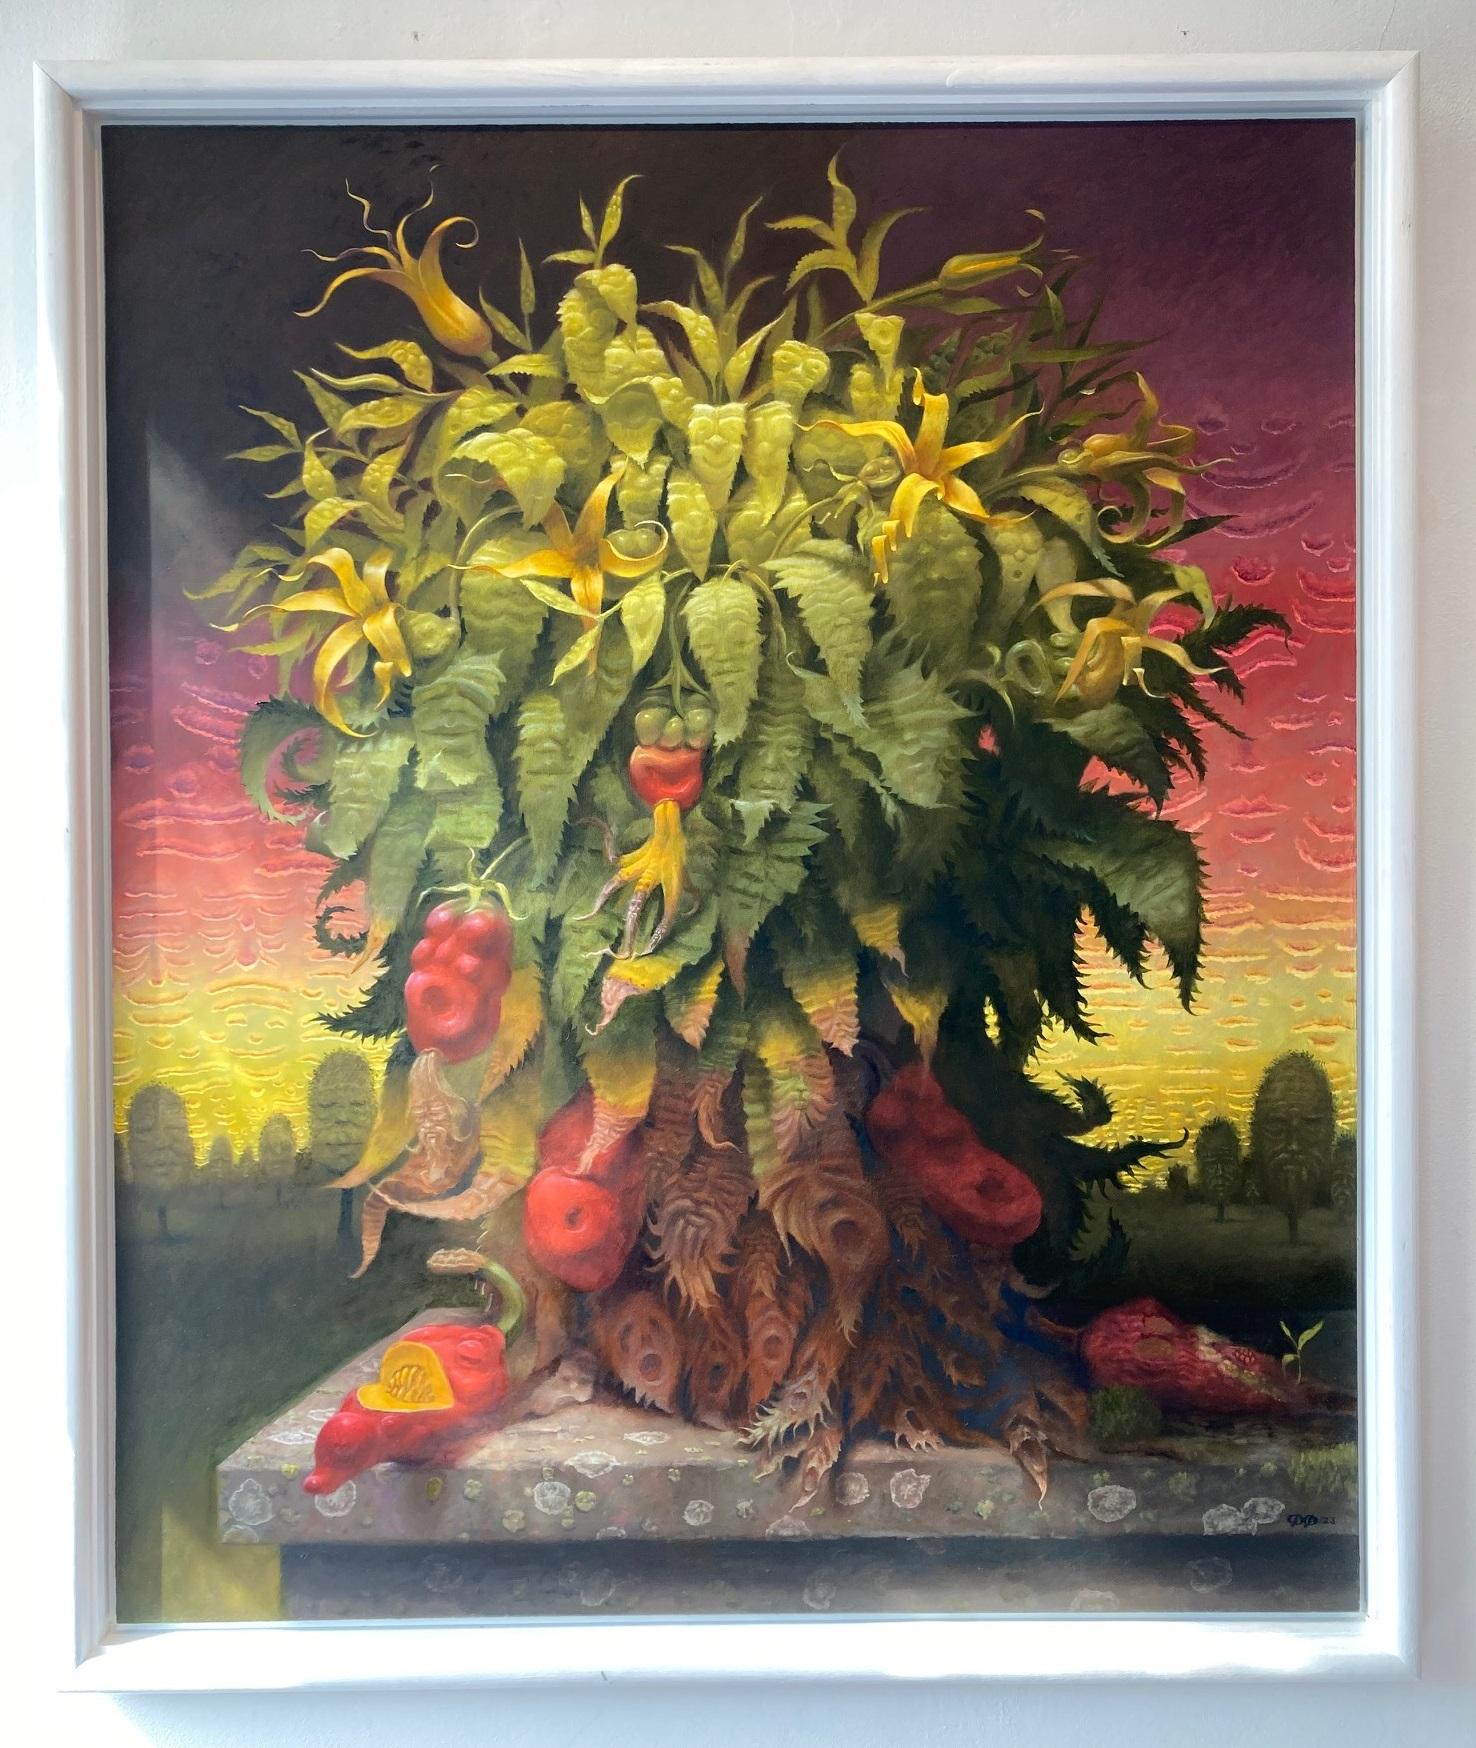 Daniel Douglas Figurative Painting - Rebirth of a Plant Oil Painting on Panel Pareidolia Surrealism In Stock